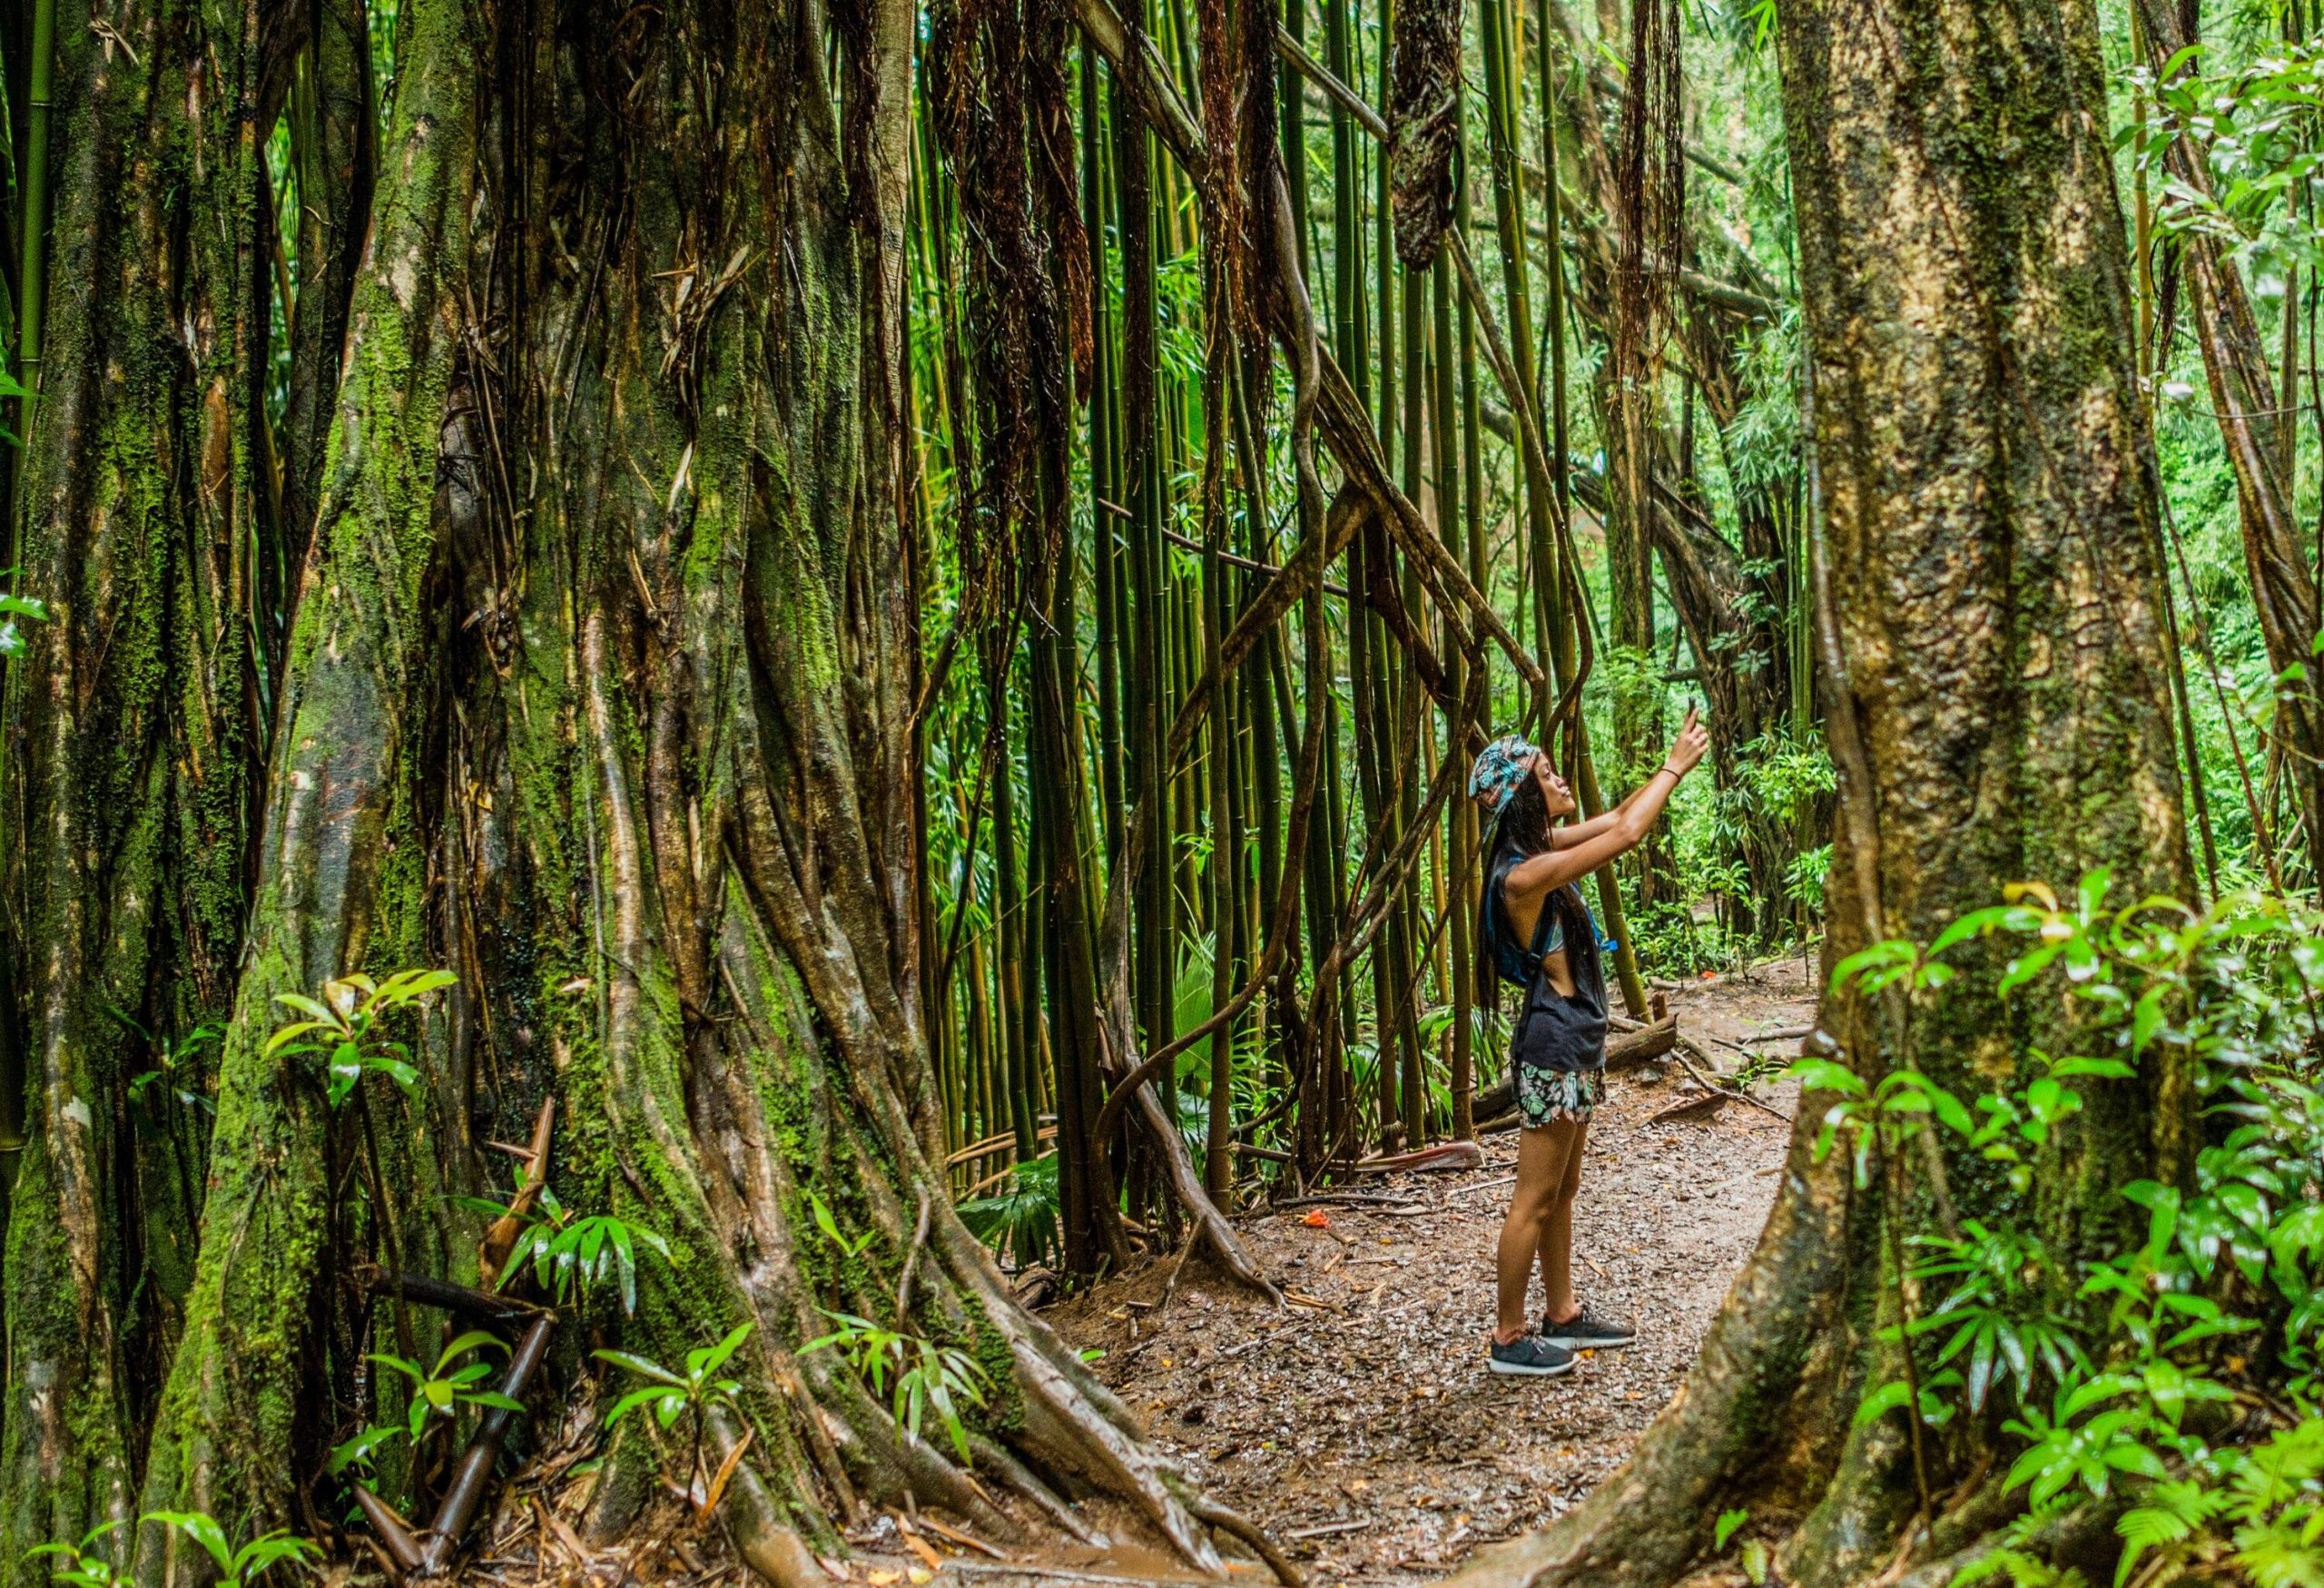 A person immersed in the beauty of the rainforest, capturing stunning images of lush greenery and vibrant flora.